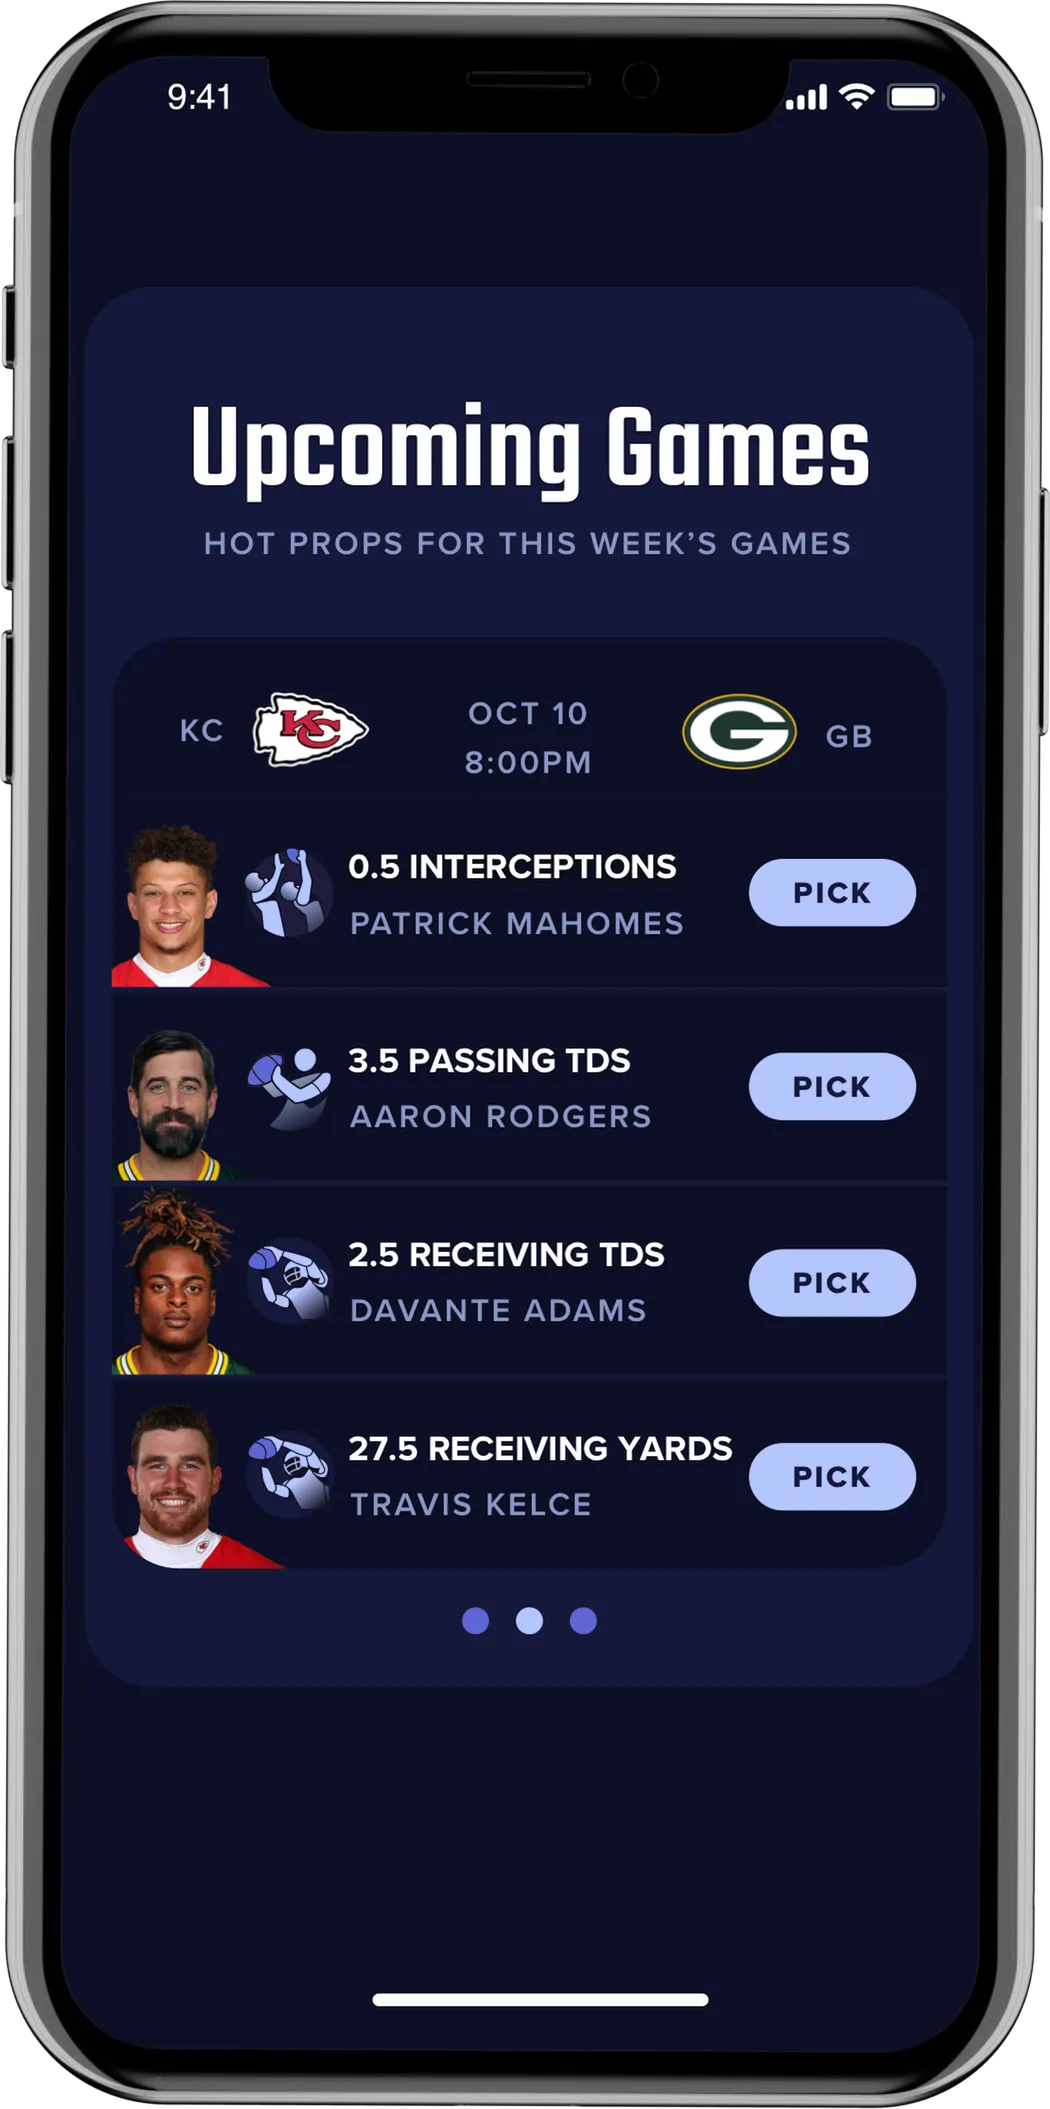 Iphone screen with Hot props for week's games